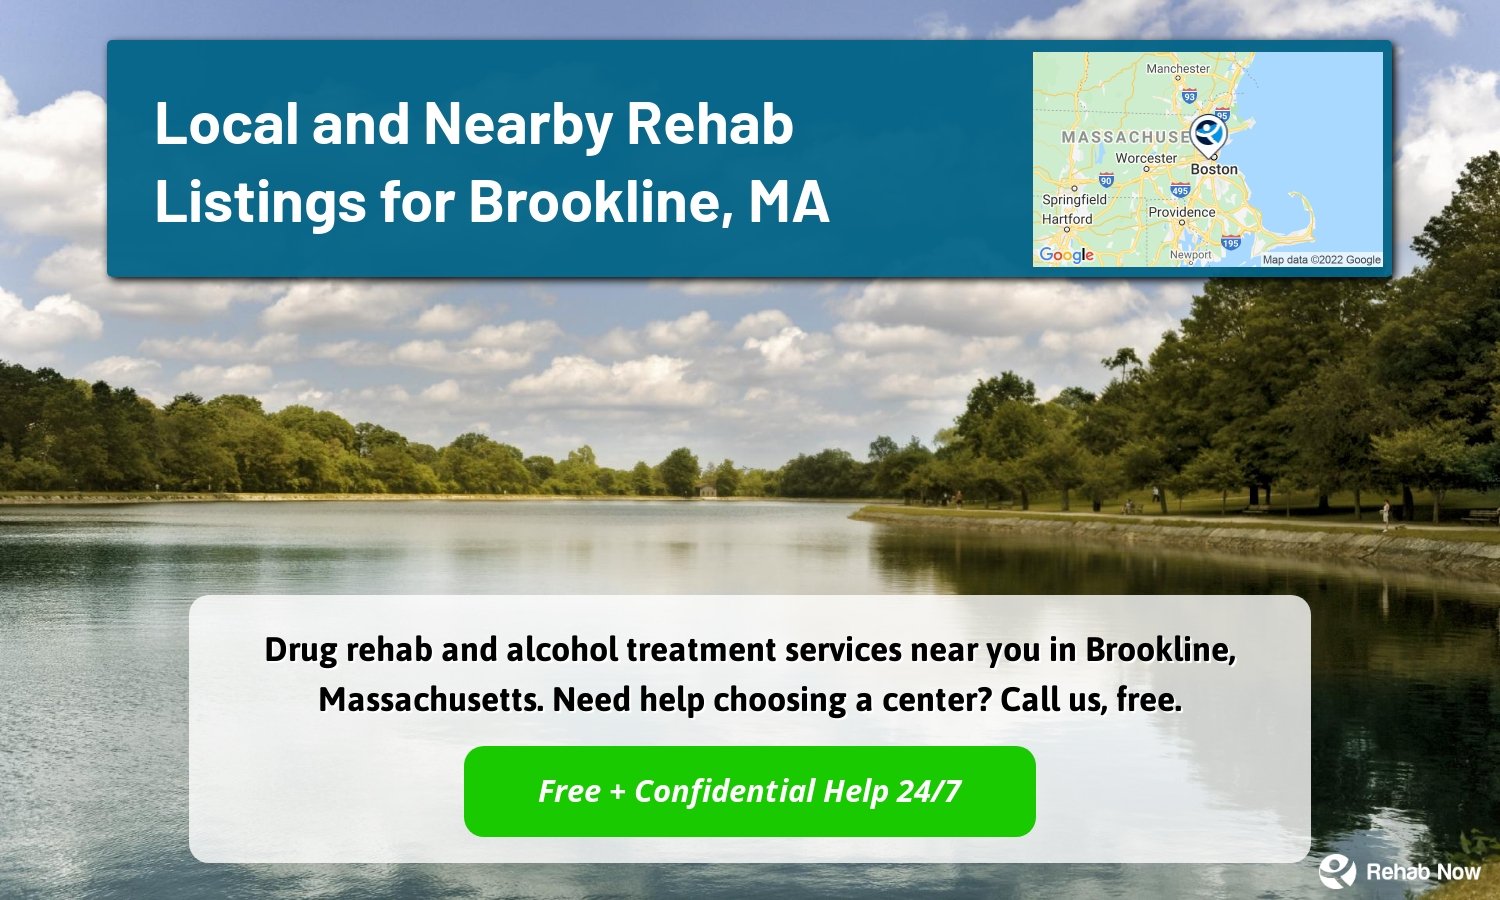 Drug rehab and alcohol treatment services near you in Brookline, Massachusetts. Need help choosing a center? Call us, free.